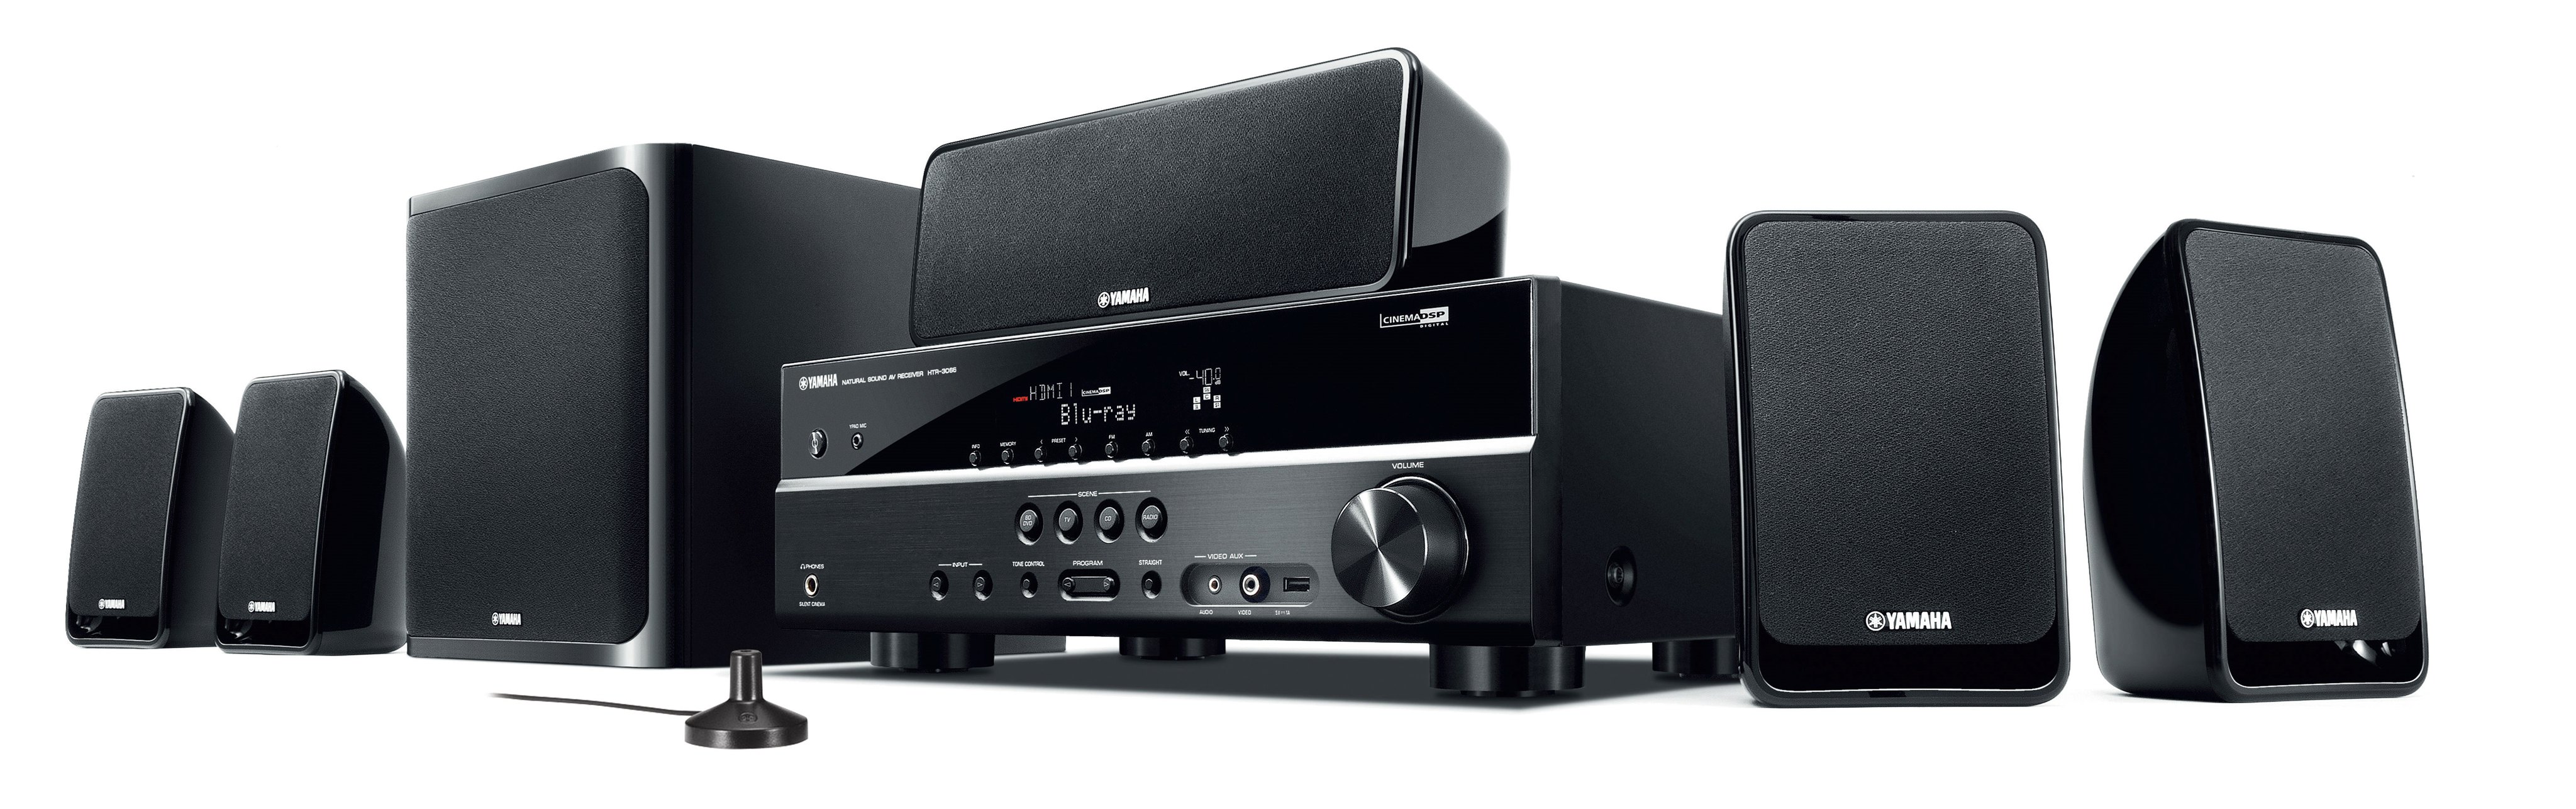 YHT-299 - Overview - Home Theater 